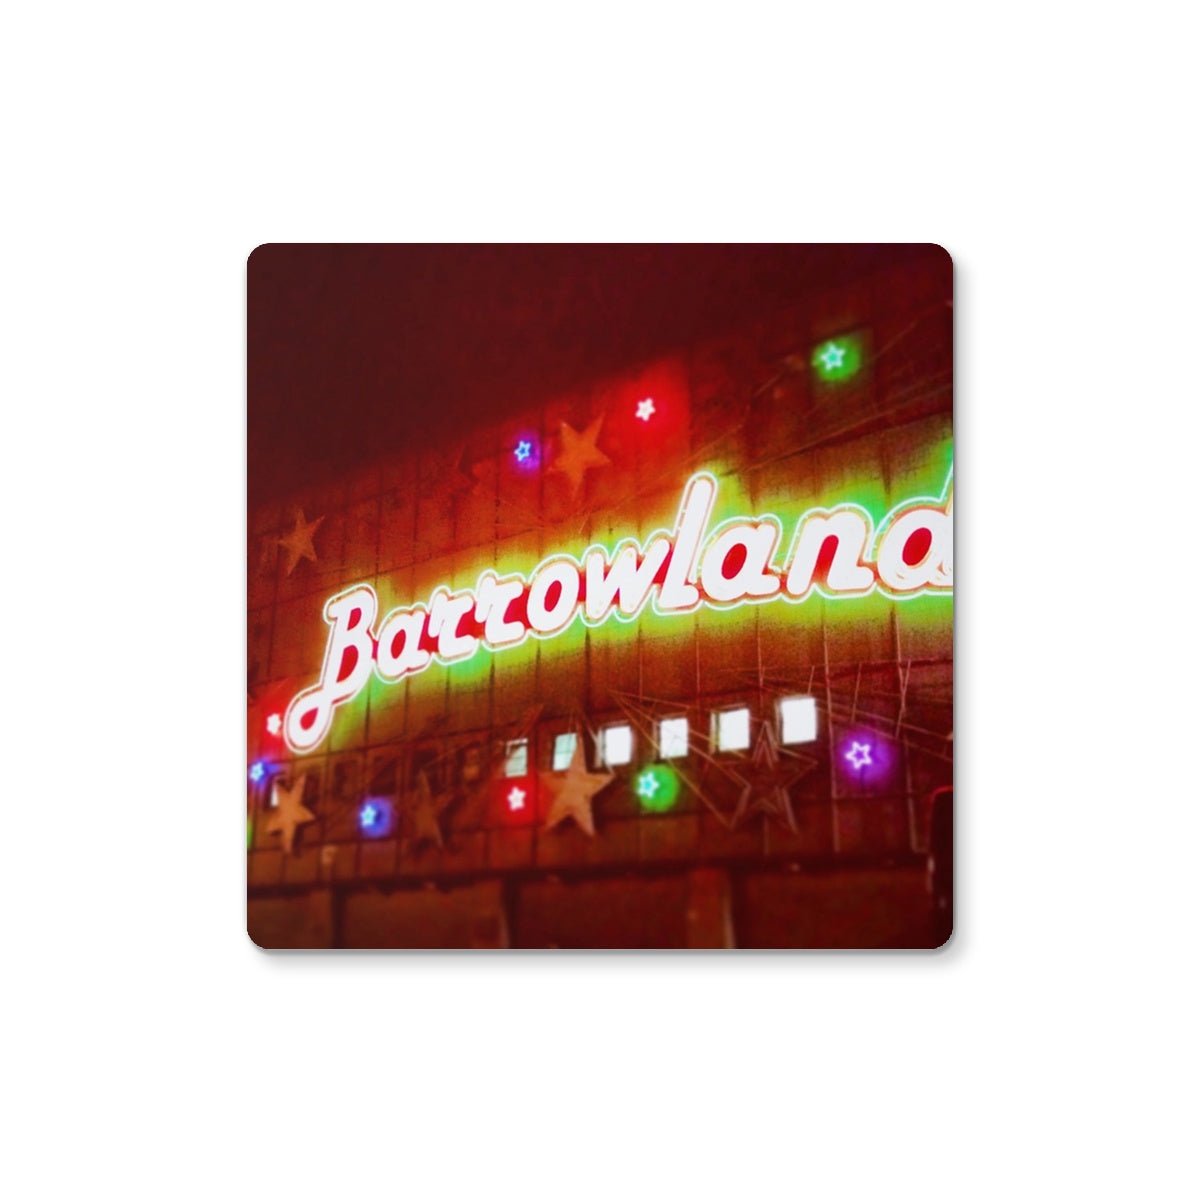 A Neon Glasgow Barrowlands Art Gifts Coaster-Coasters-Edinburgh & Glasgow Art Gallery-2 Coasters-Paintings, Prints, Homeware, Art Gifts From Scotland By Scottish Artist Kevin Hunter